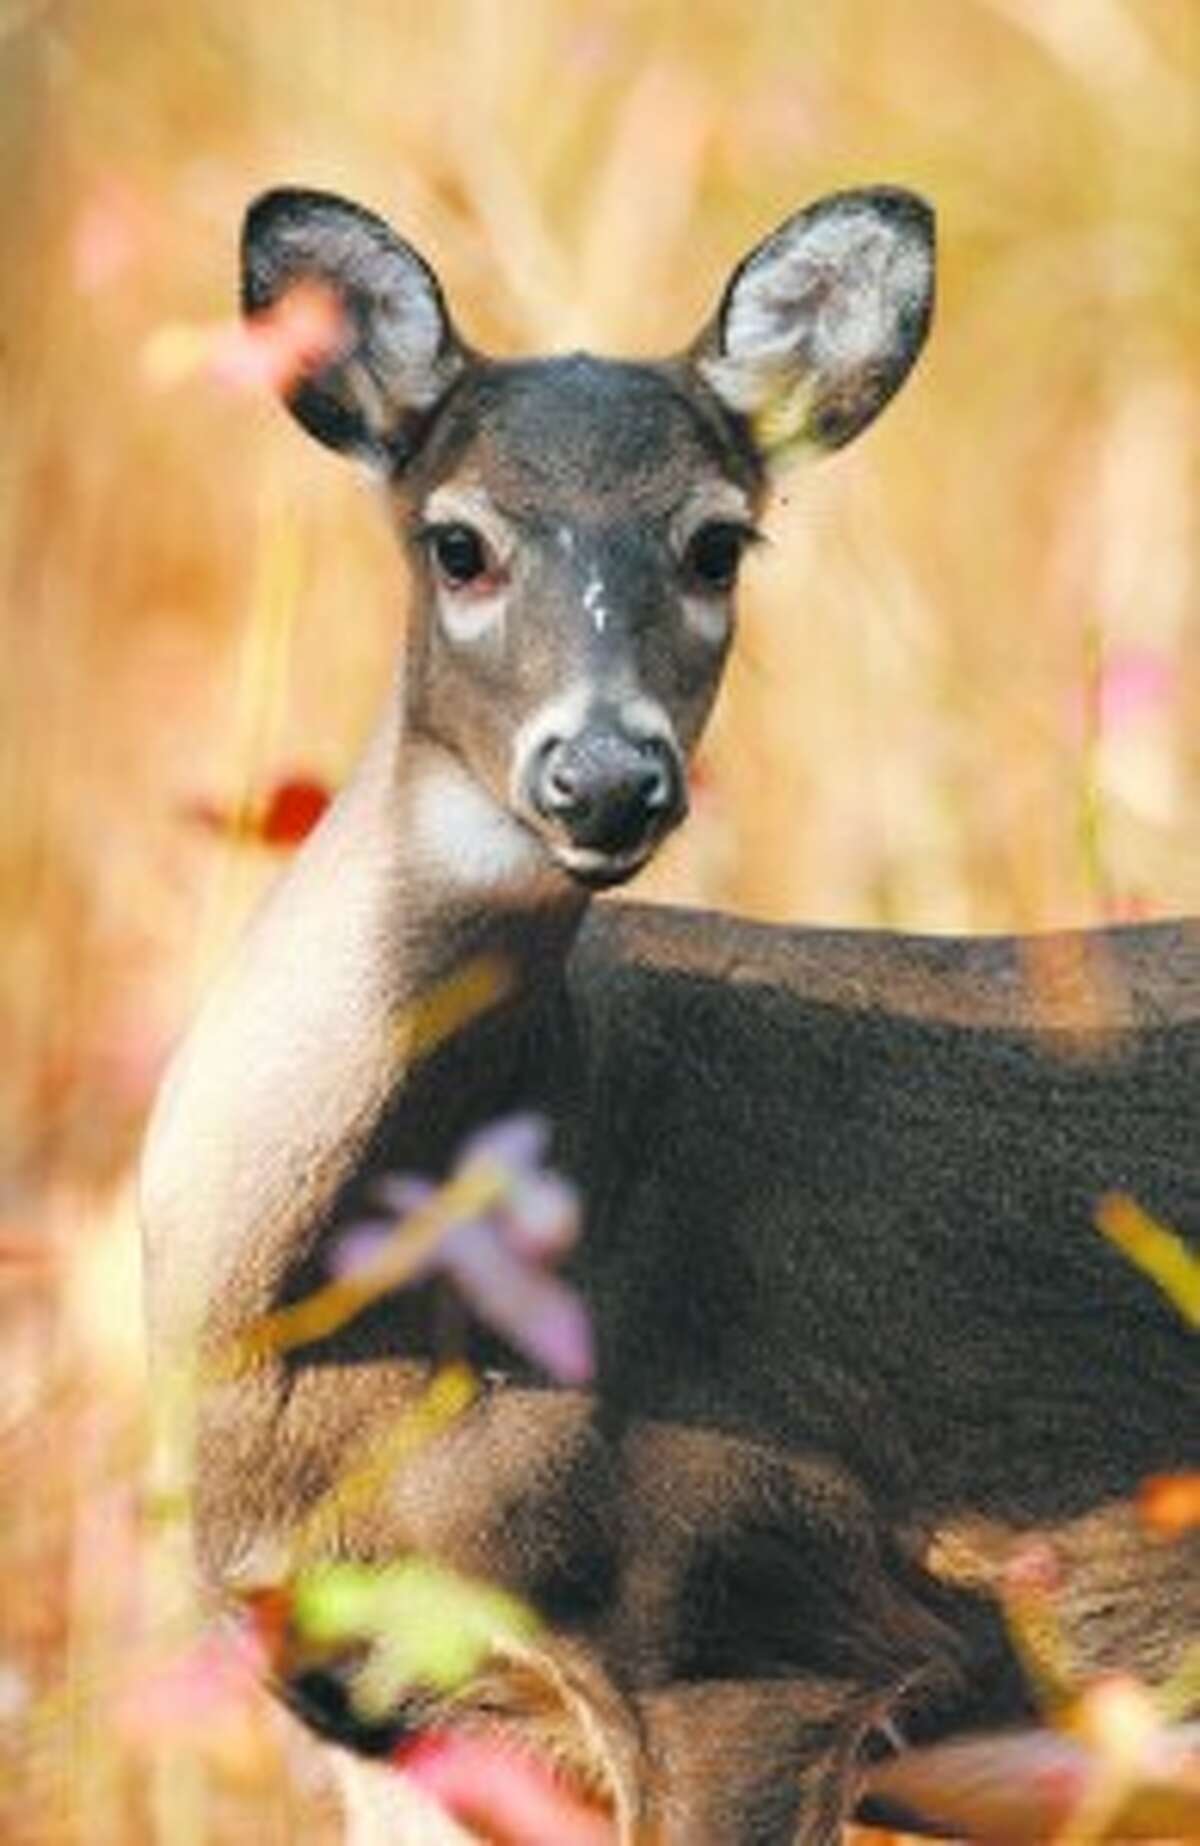 QUOTAS: The Department of Natural Resources will make a little more than 70,000 licenses available for antlerless deer this season. (Courtesy photo)